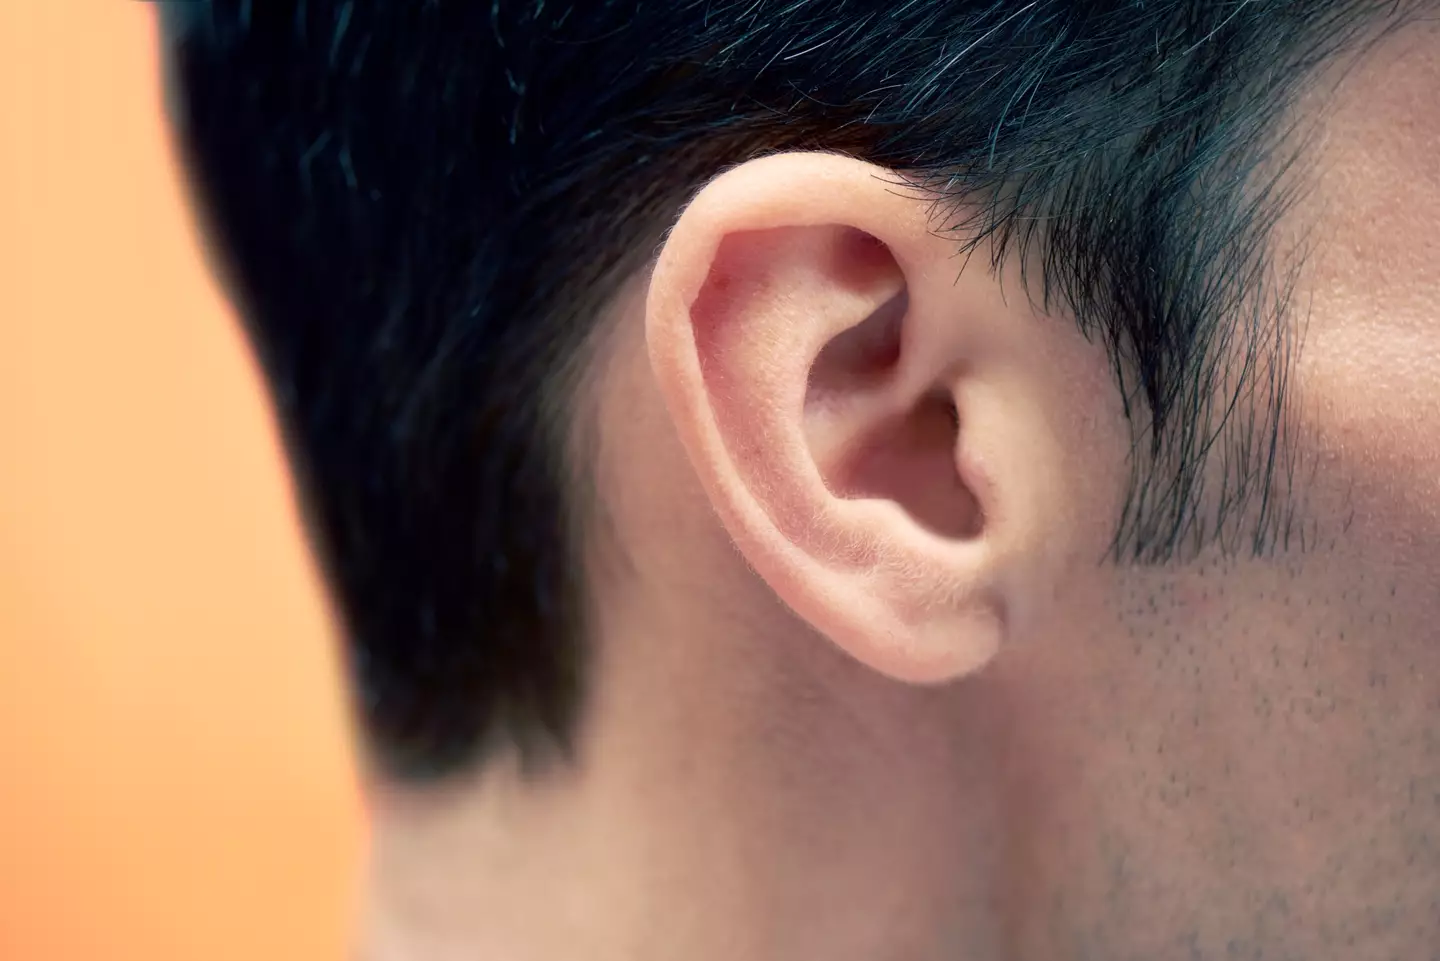 Look at this ear, unburdened by headphone or ear pod. Now silent walking can begin.